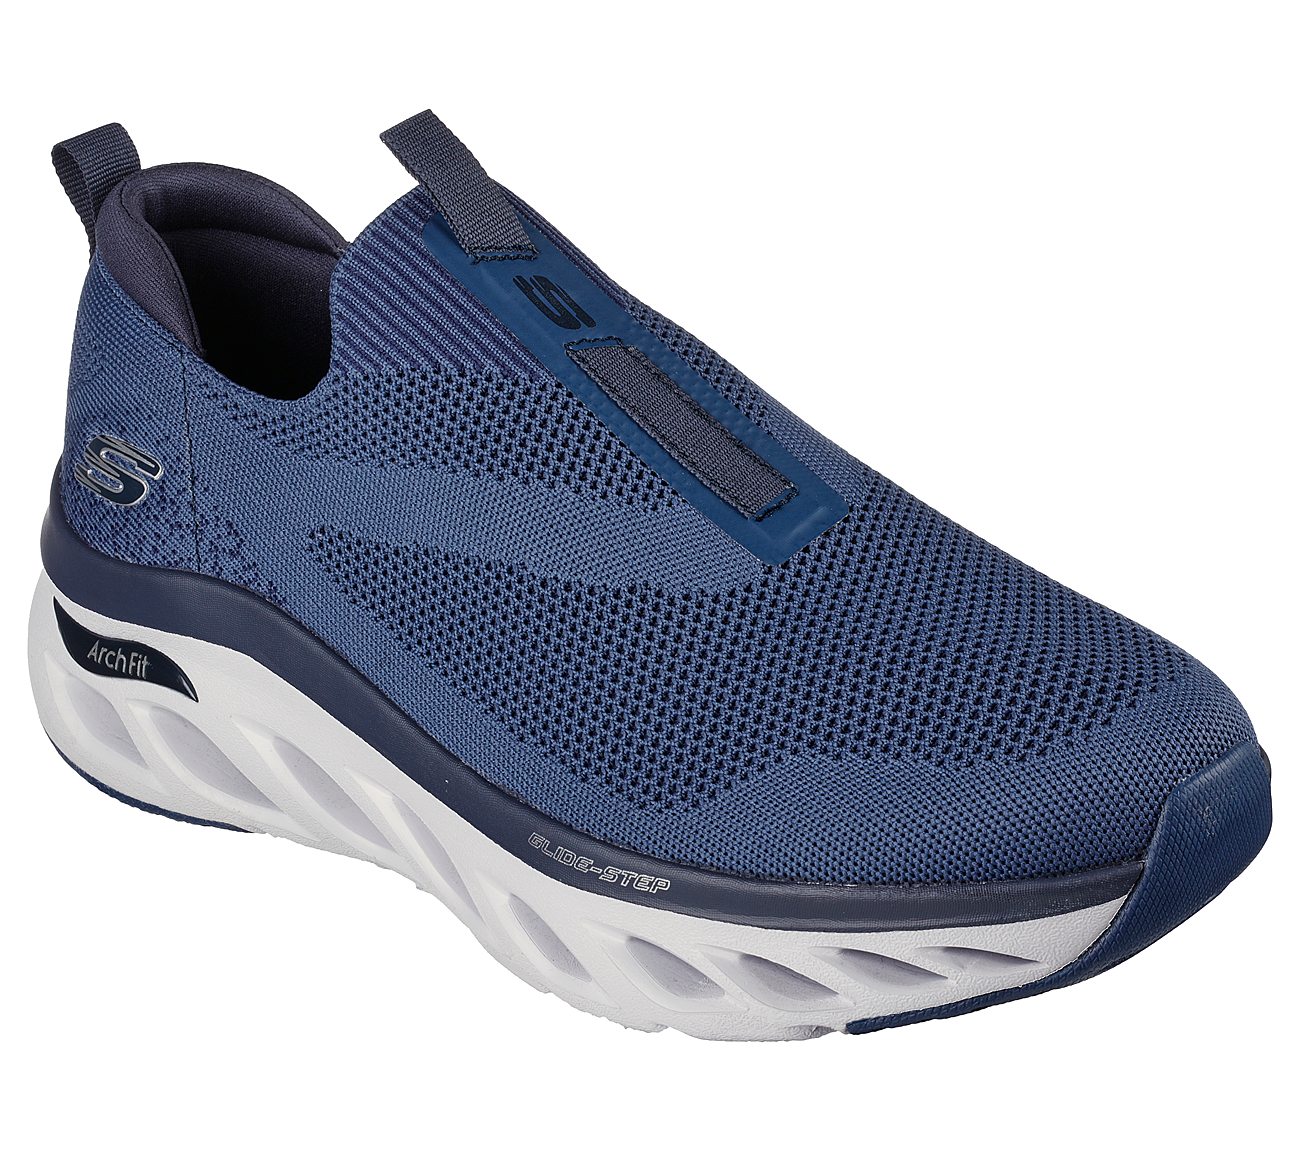 ARCH FIT GLIDE-STEP - NODE, NNNAVY Footwear Right View